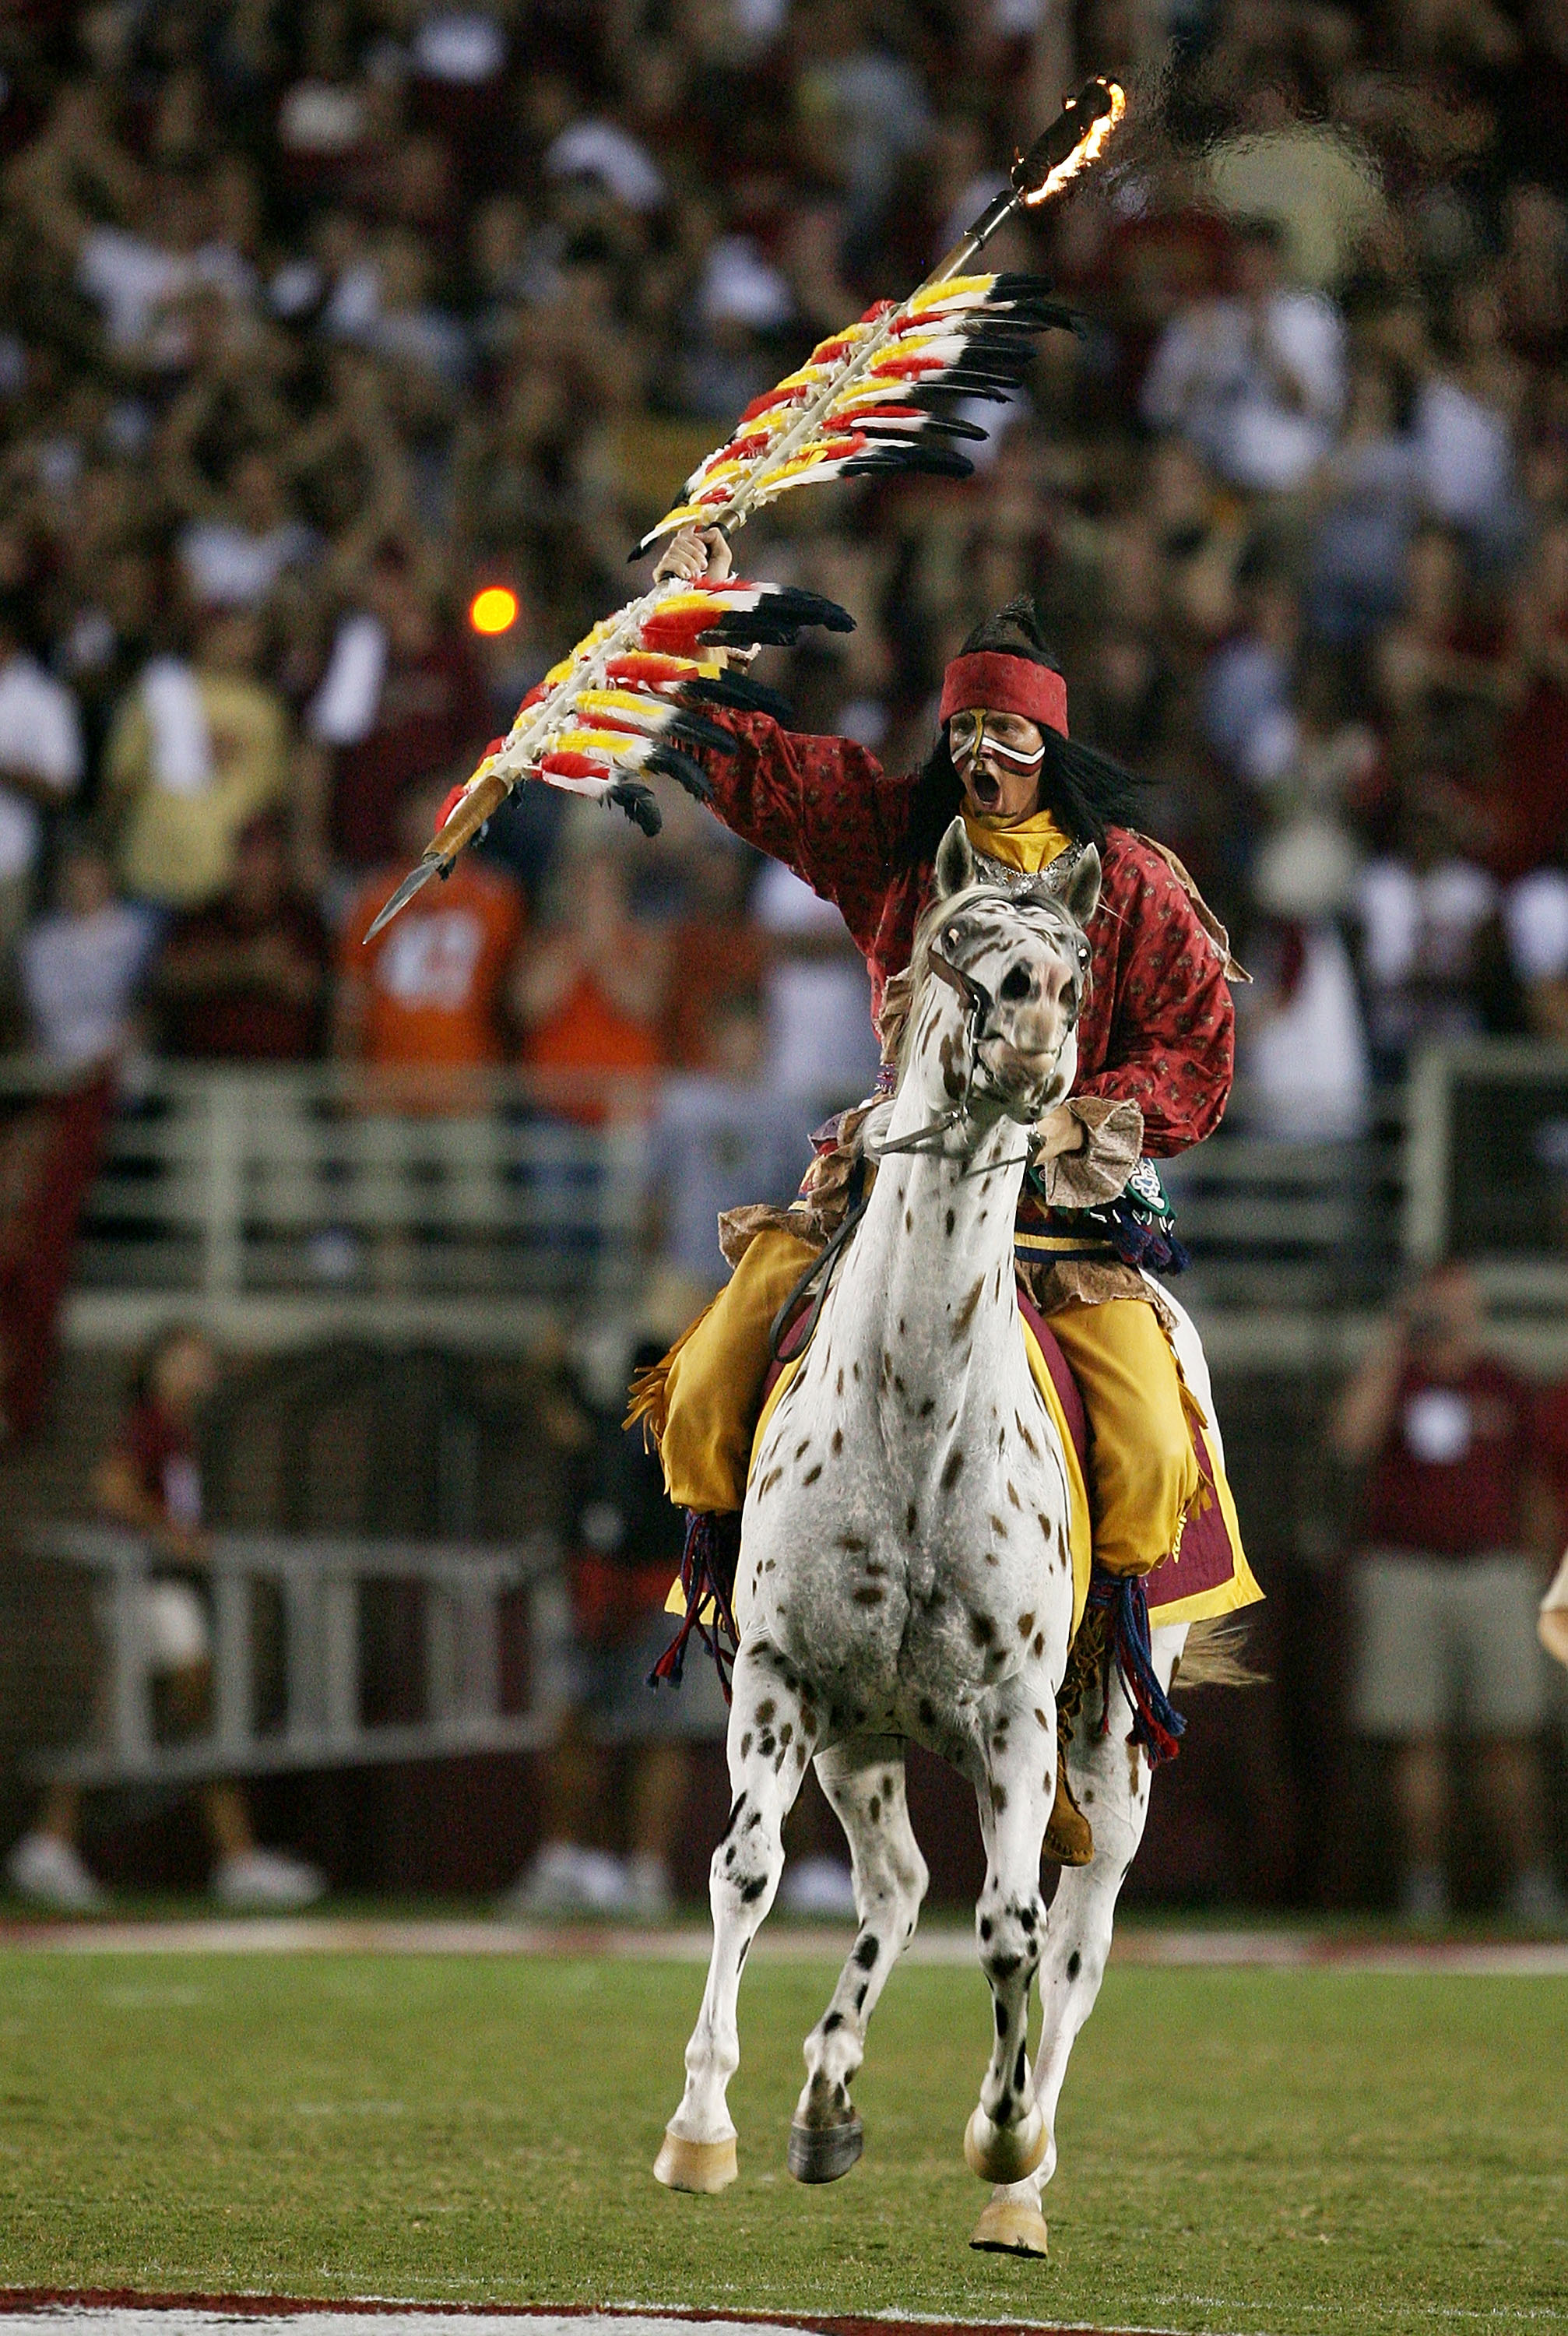 TALLAHASSEE, FL - SEPTEMBER 07:  Renegade and Chief Osceola prepares to bury his spear on the 50-yard line before the Miami Hurricanes take on the Florida State Seminoles at Doak Campbell Stadium on September 7, 2009 in Tallahassee, Florida. Miami defeate